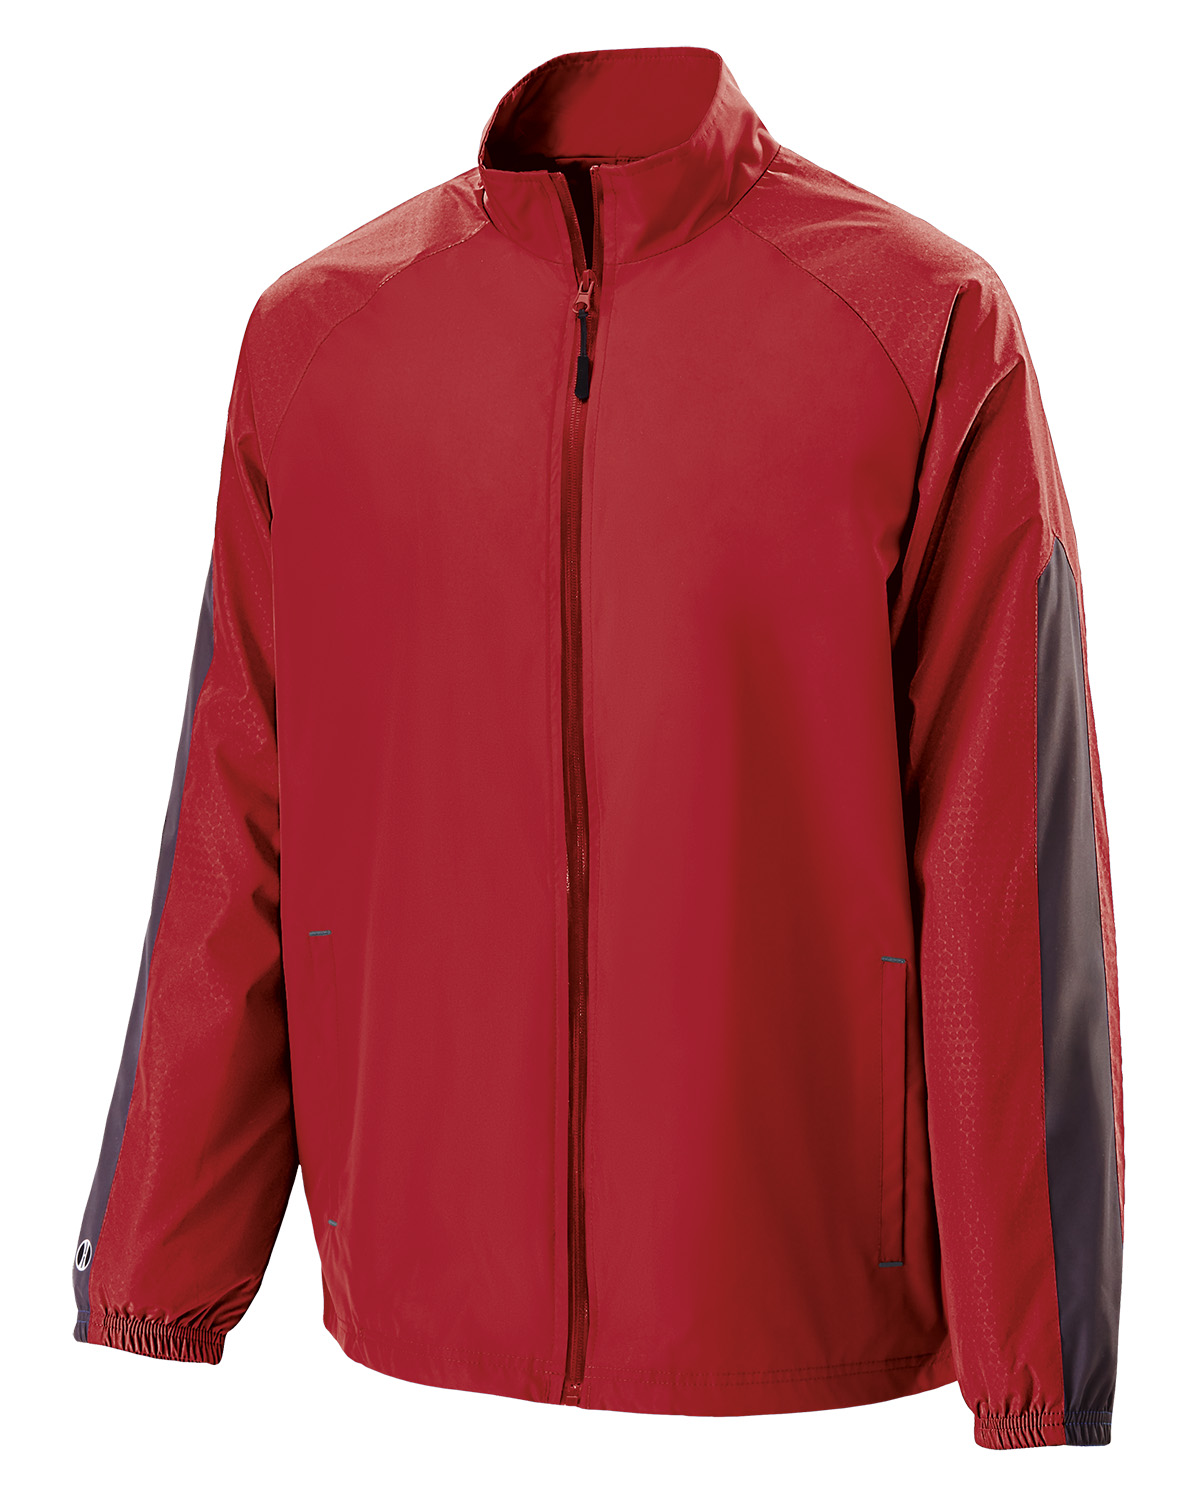 Holloway 222412 - Adult Polyester Bionic Jacket